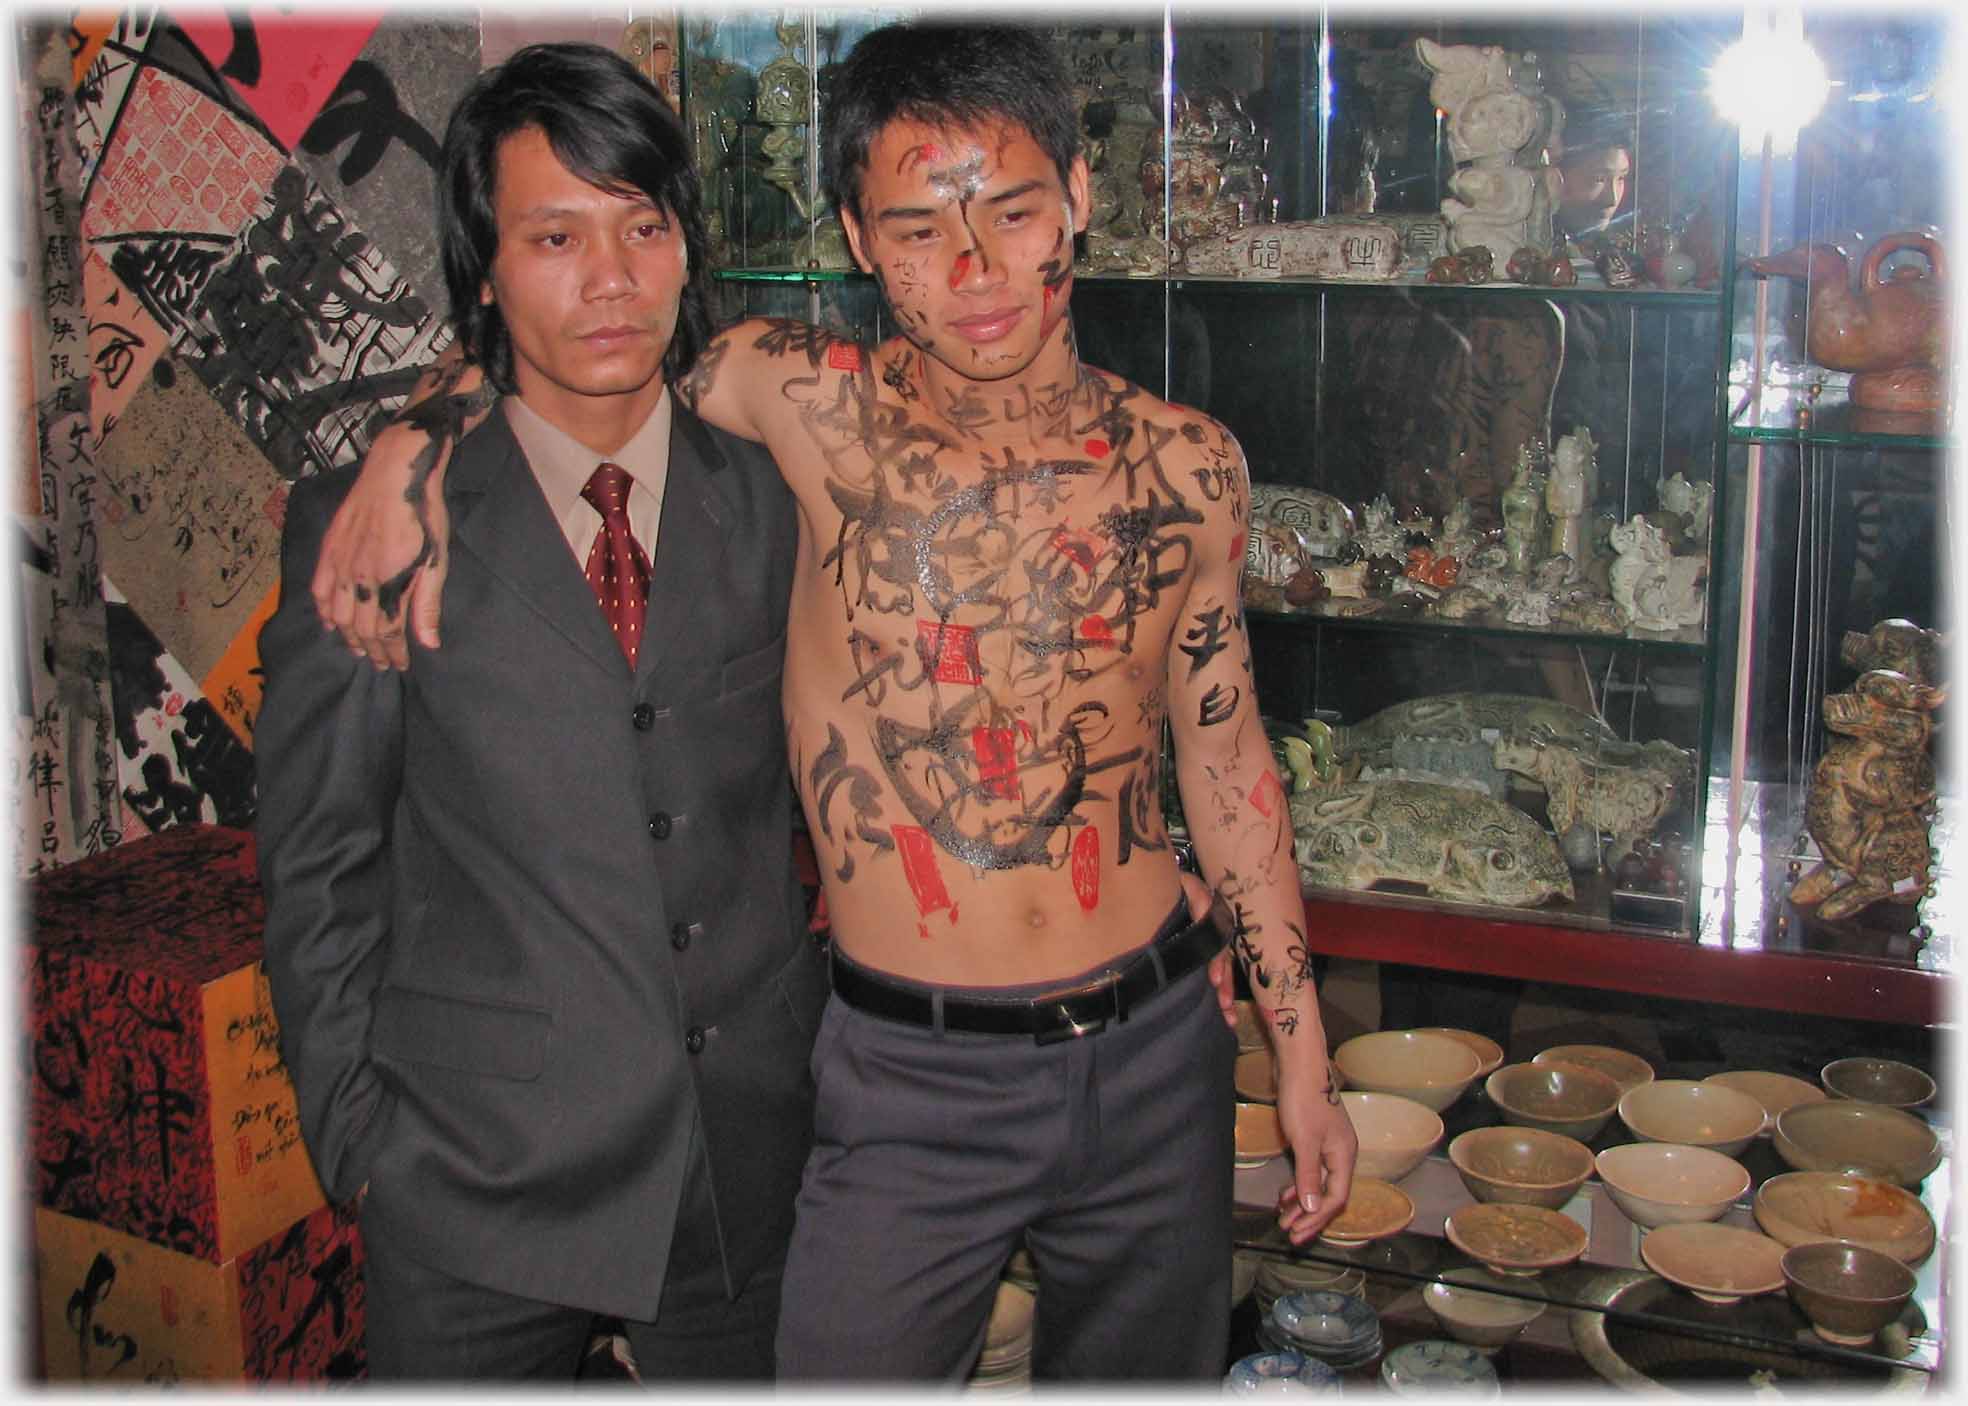 Man with torso covered in ink markings, arm on another man in suit's shoulders.